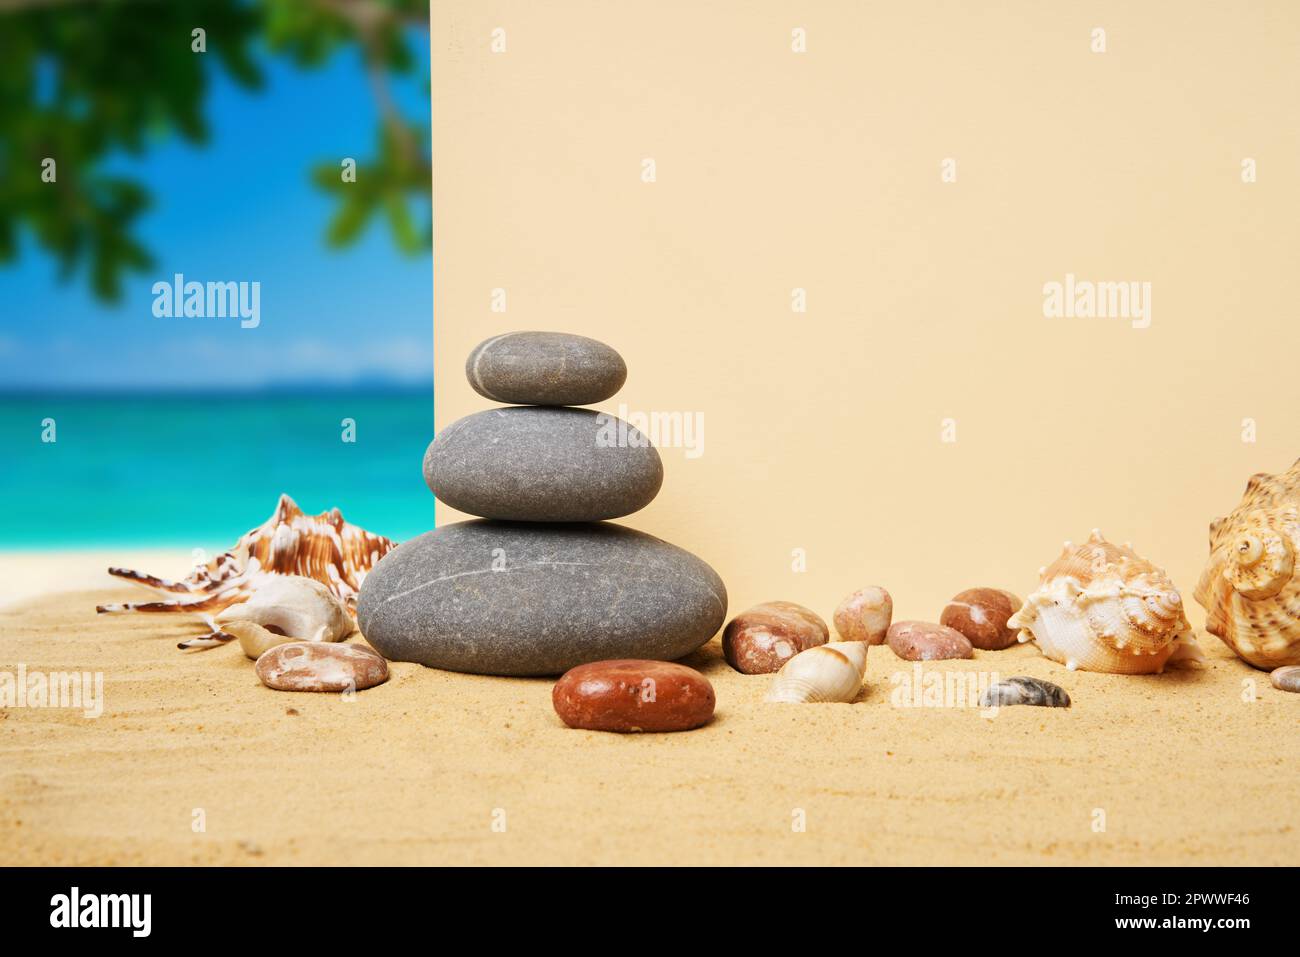 Invitation or greeting card mockup with seashells and pyramid of stones on the summer sandy beach at ocean background. Vacation concept, copy space Stock Photo